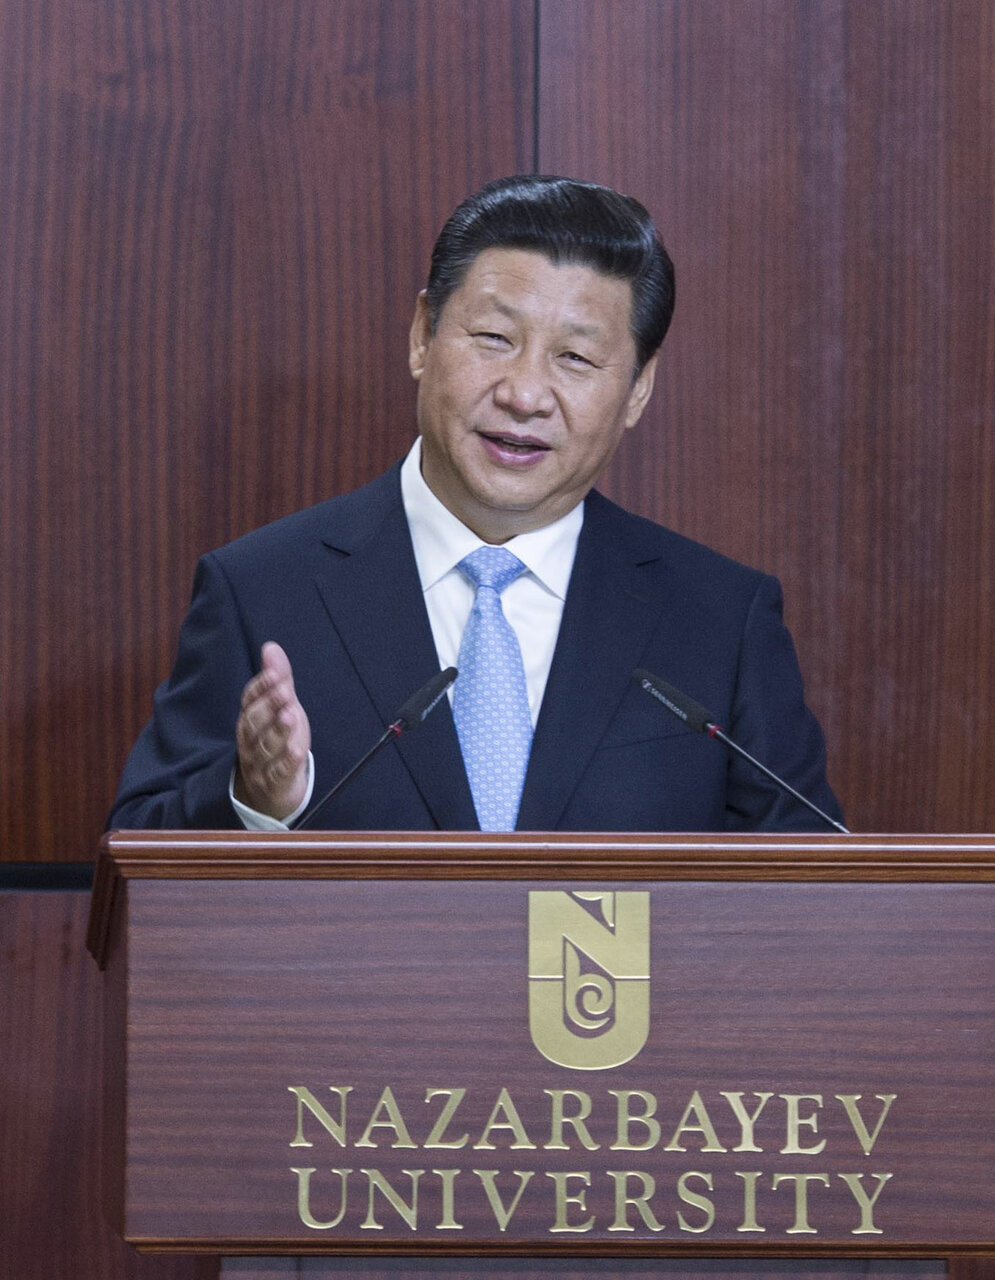 "A just cause finds great support": Xi Jinping and the Shanghai Cooperation Organization